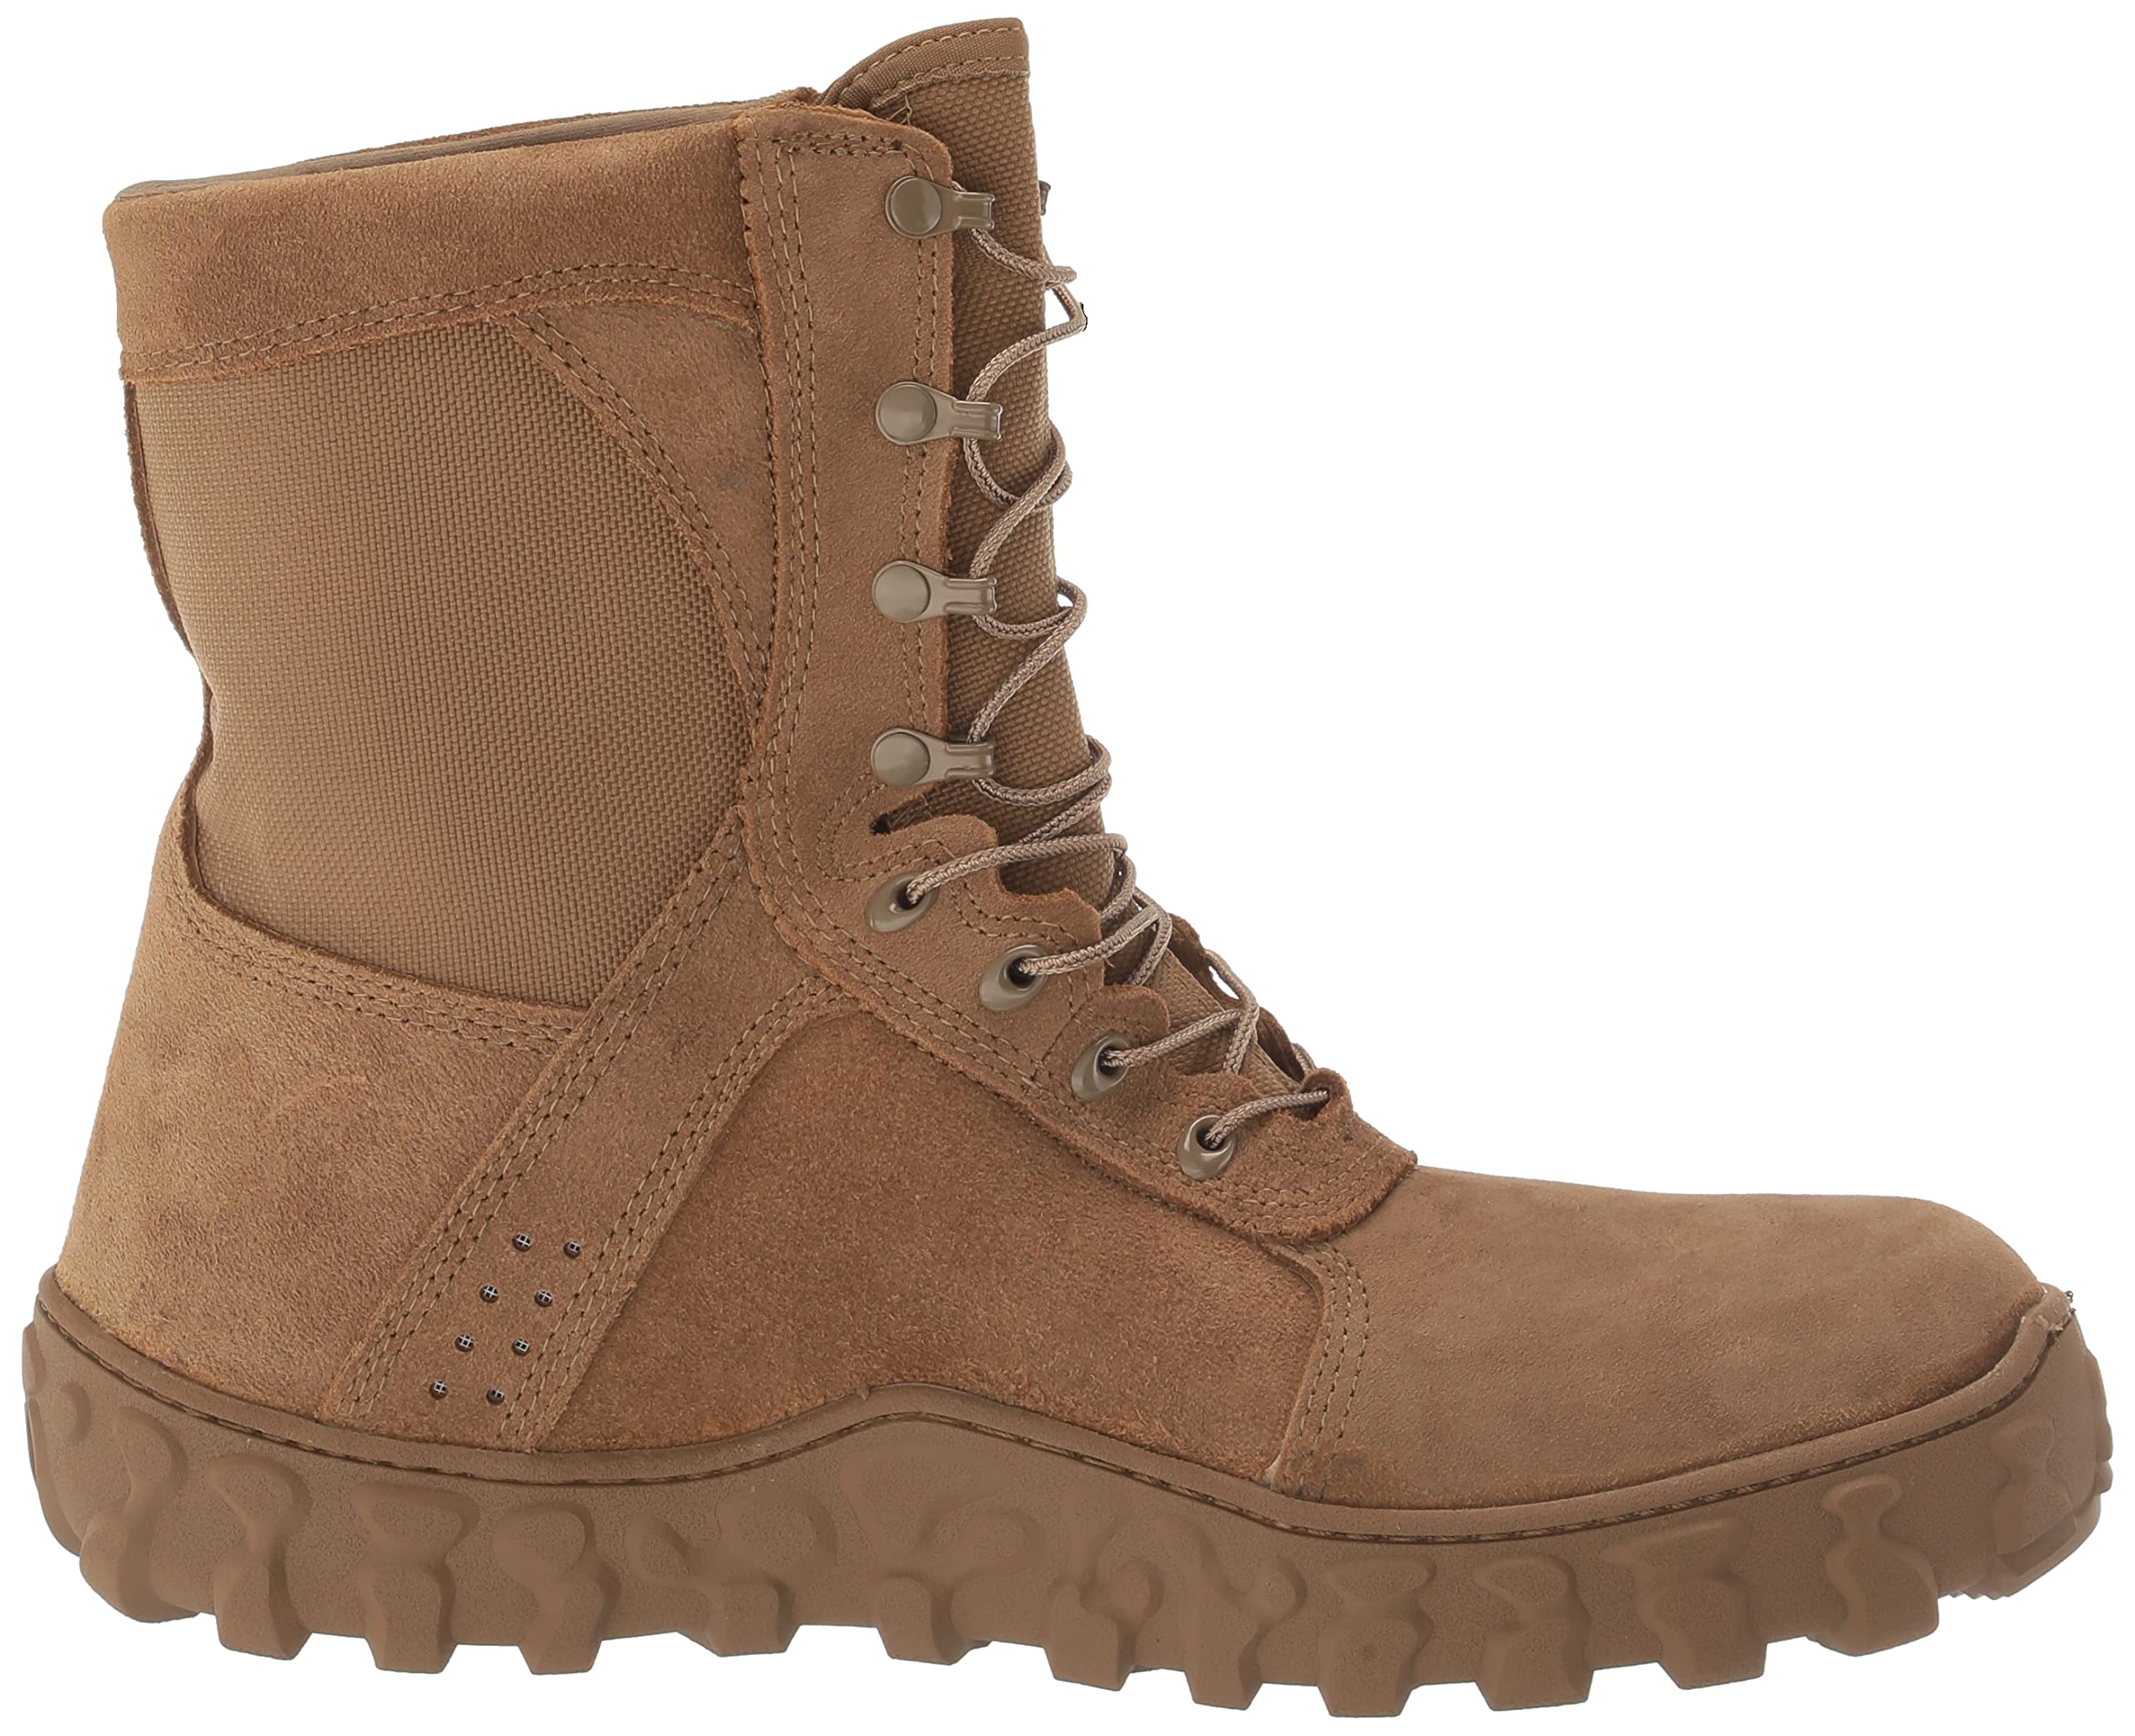 Rocky Men's Rkc050 Military and Tactical Boot